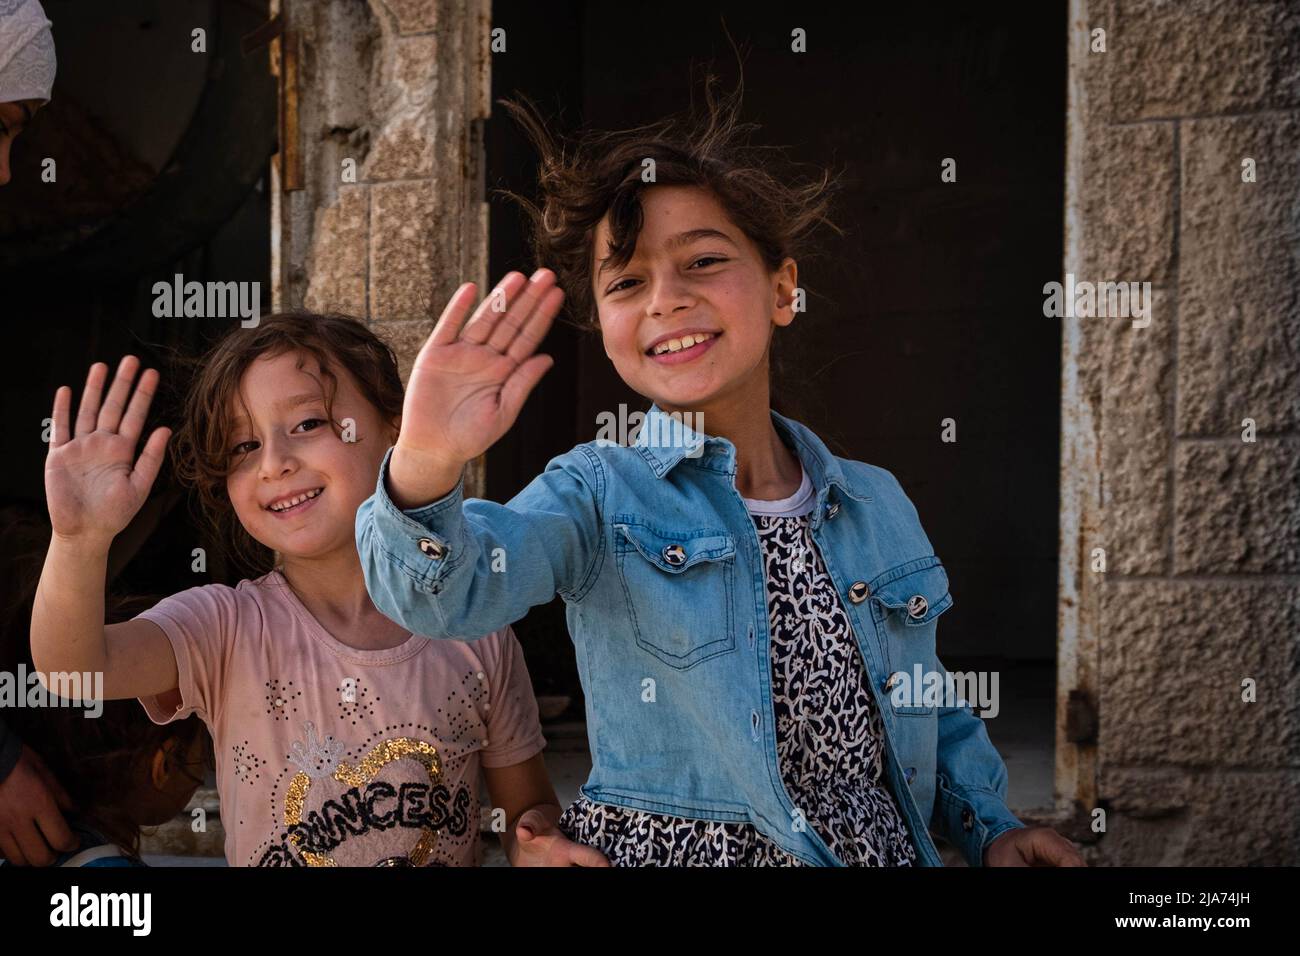 Syrian children waving hands and smiling in Darayya  after the Civil War. Stock Photo